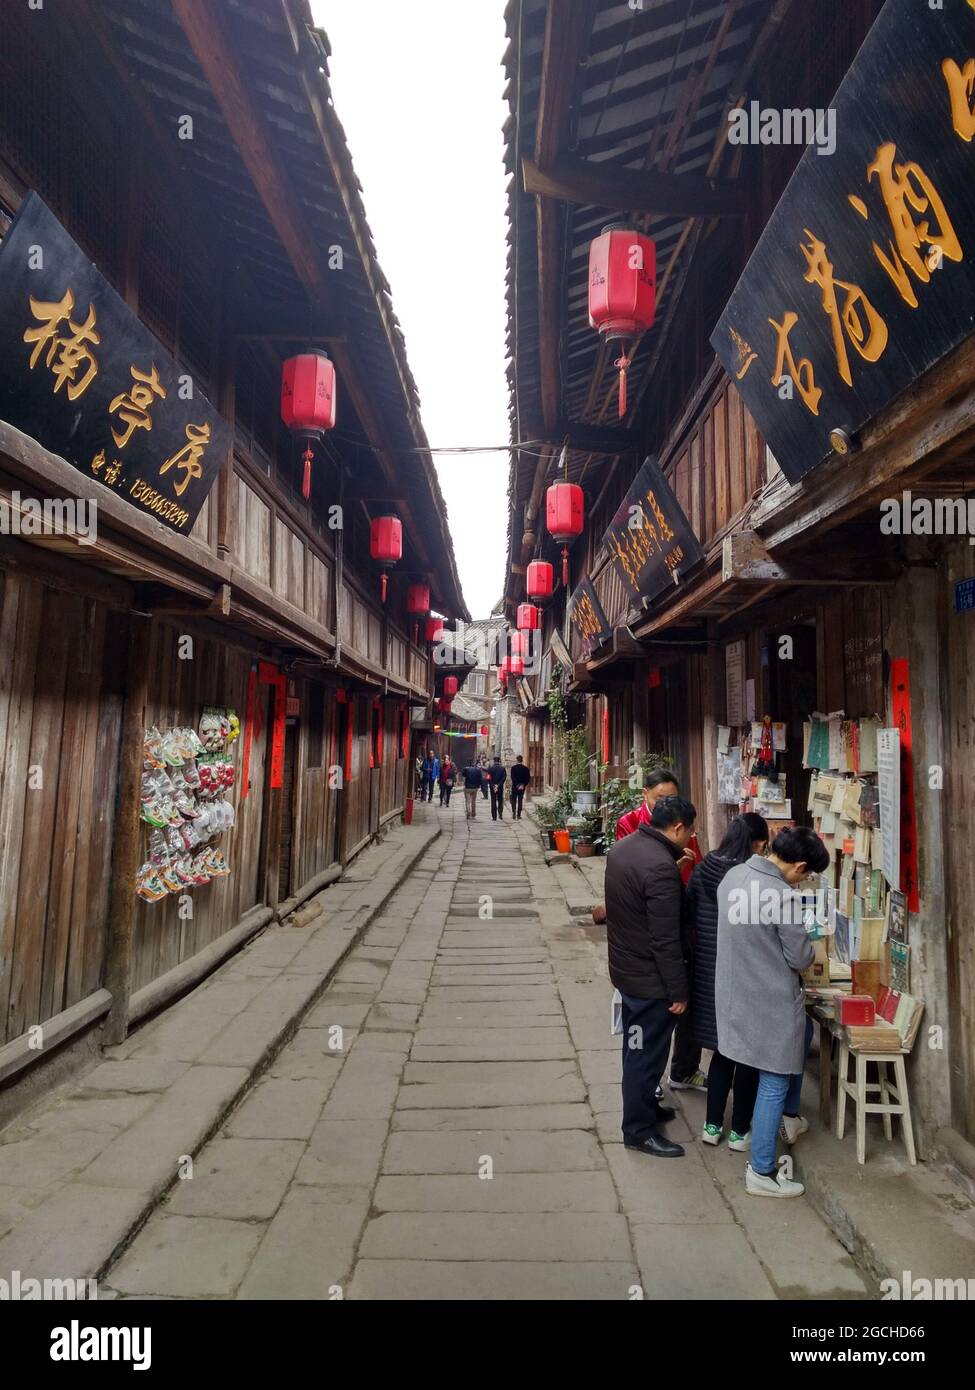 People outside local tourist shops in the ancient market district of Lizhuang with old buildings and beautiful carved wooden signs Stock Photo